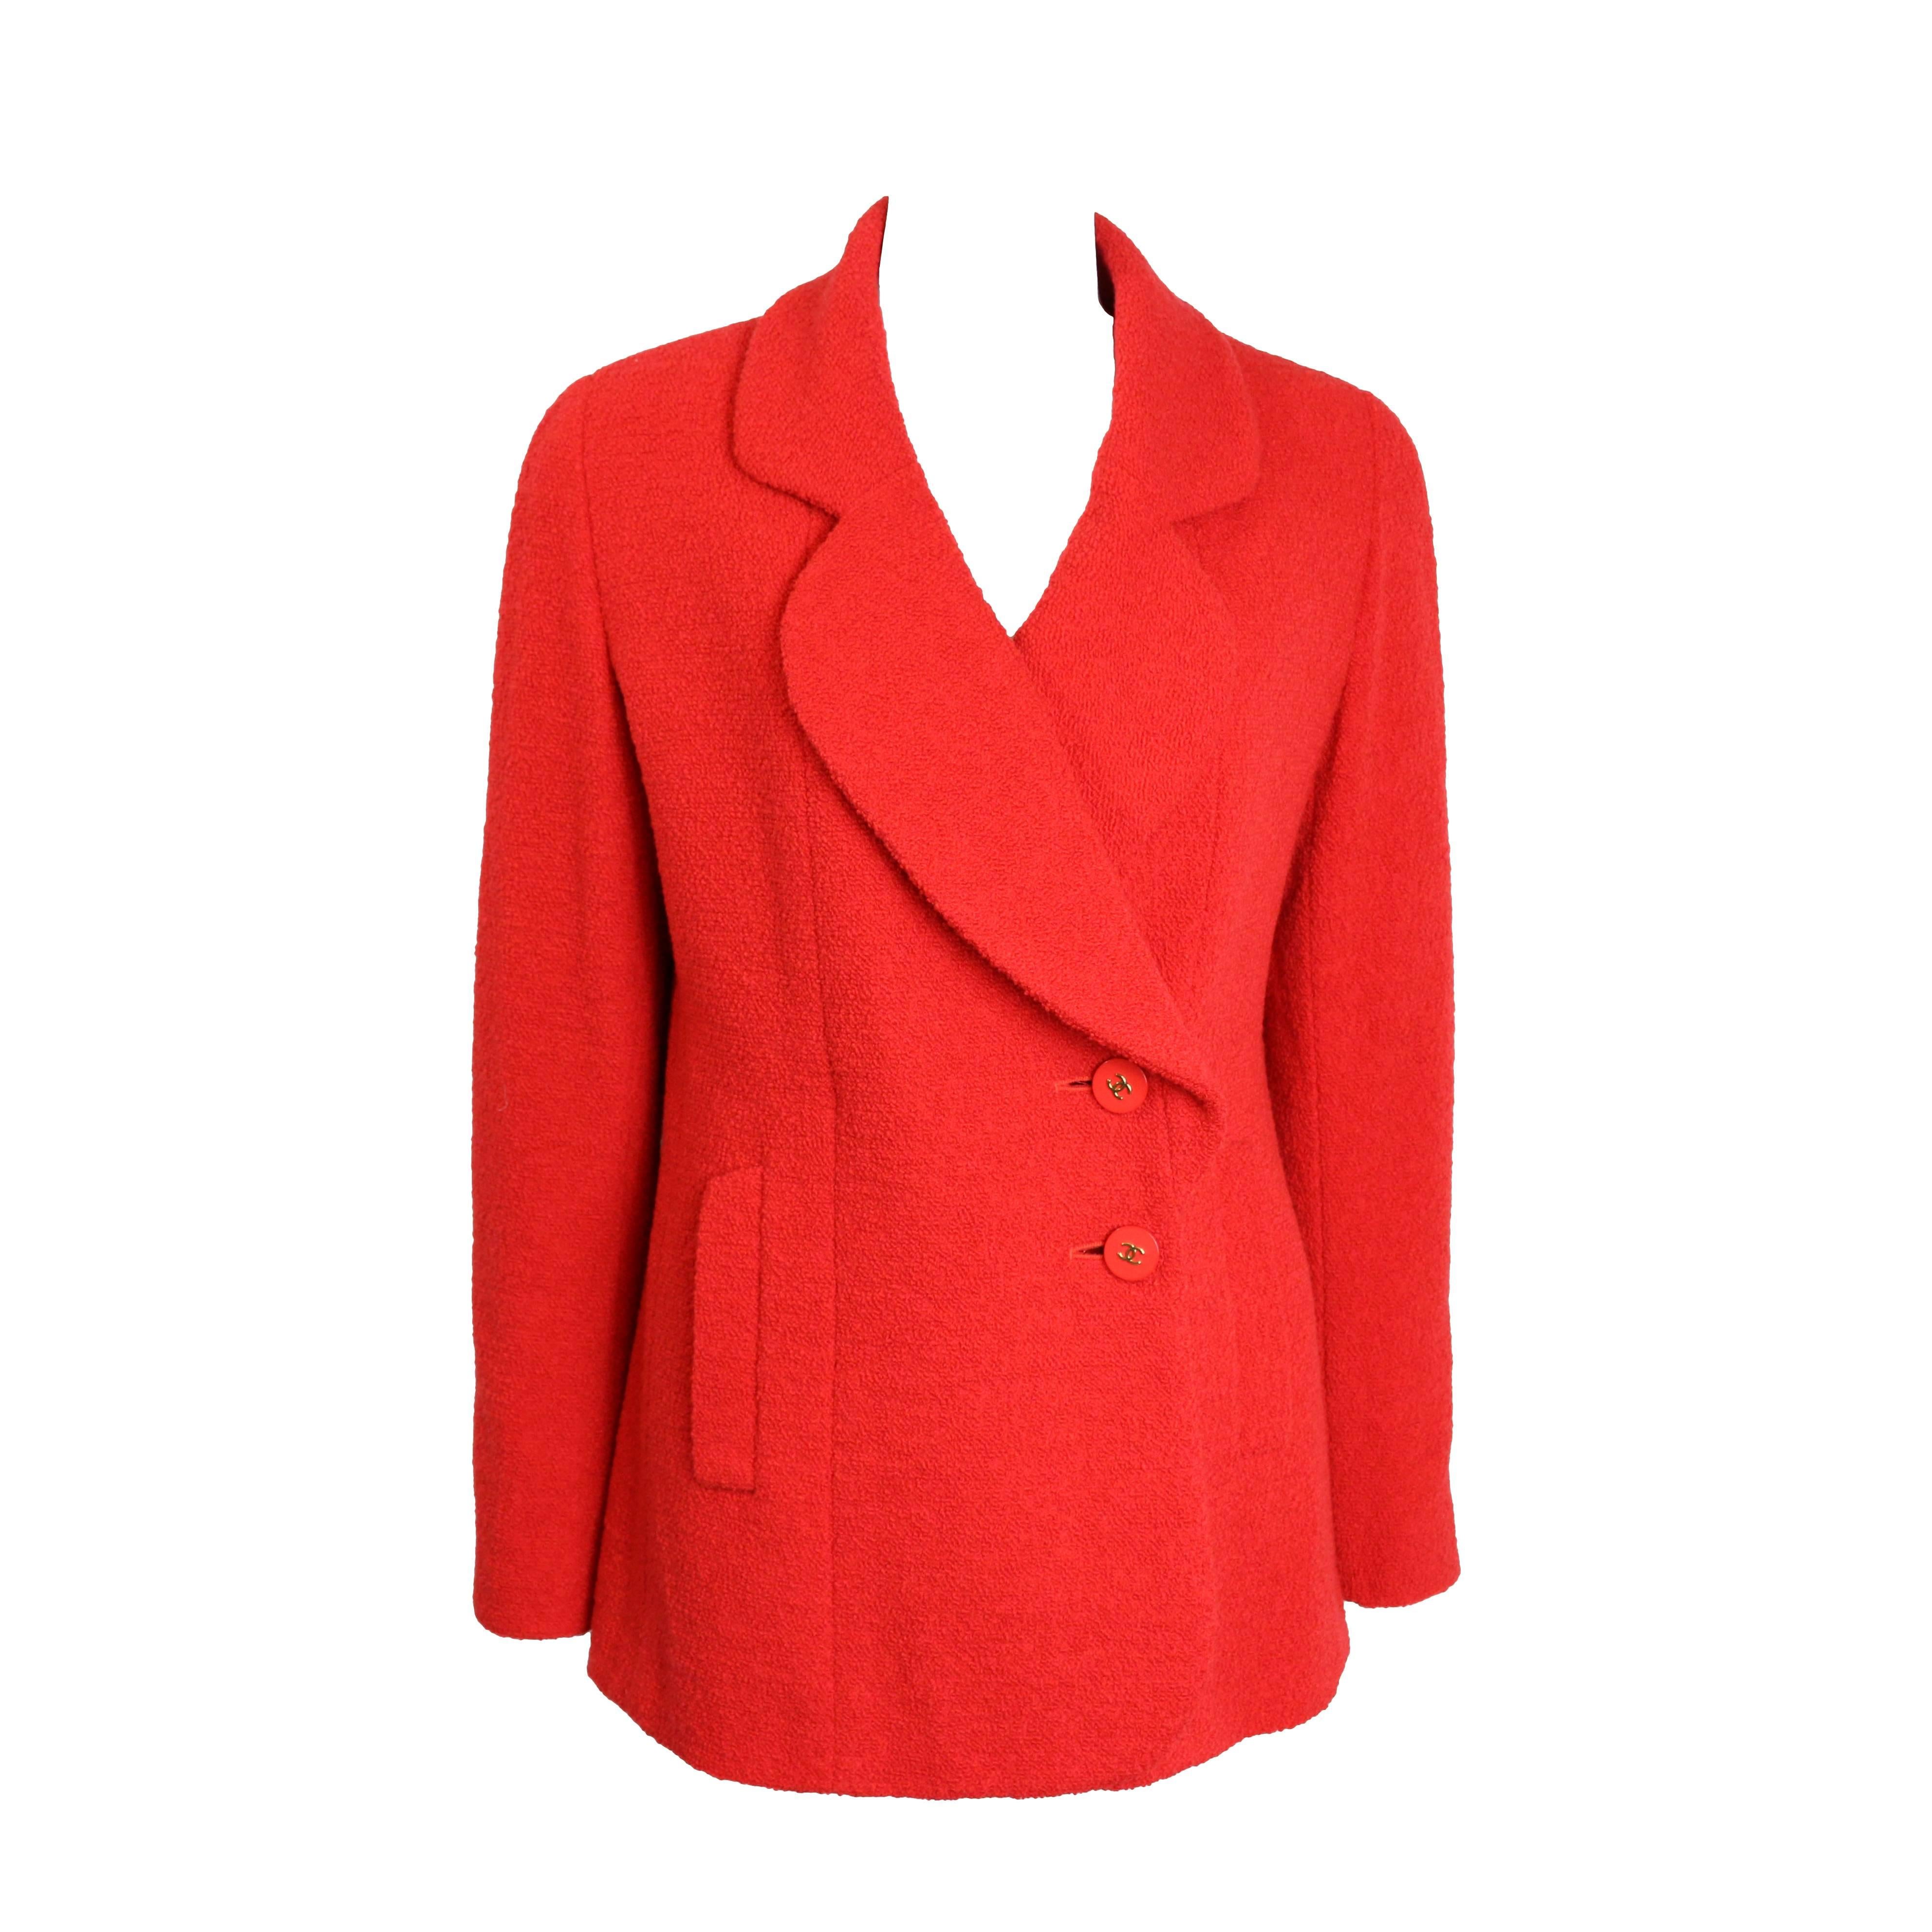 Vintage Fall 1994 Chanel Red Boucle Wool Jacket For Sale